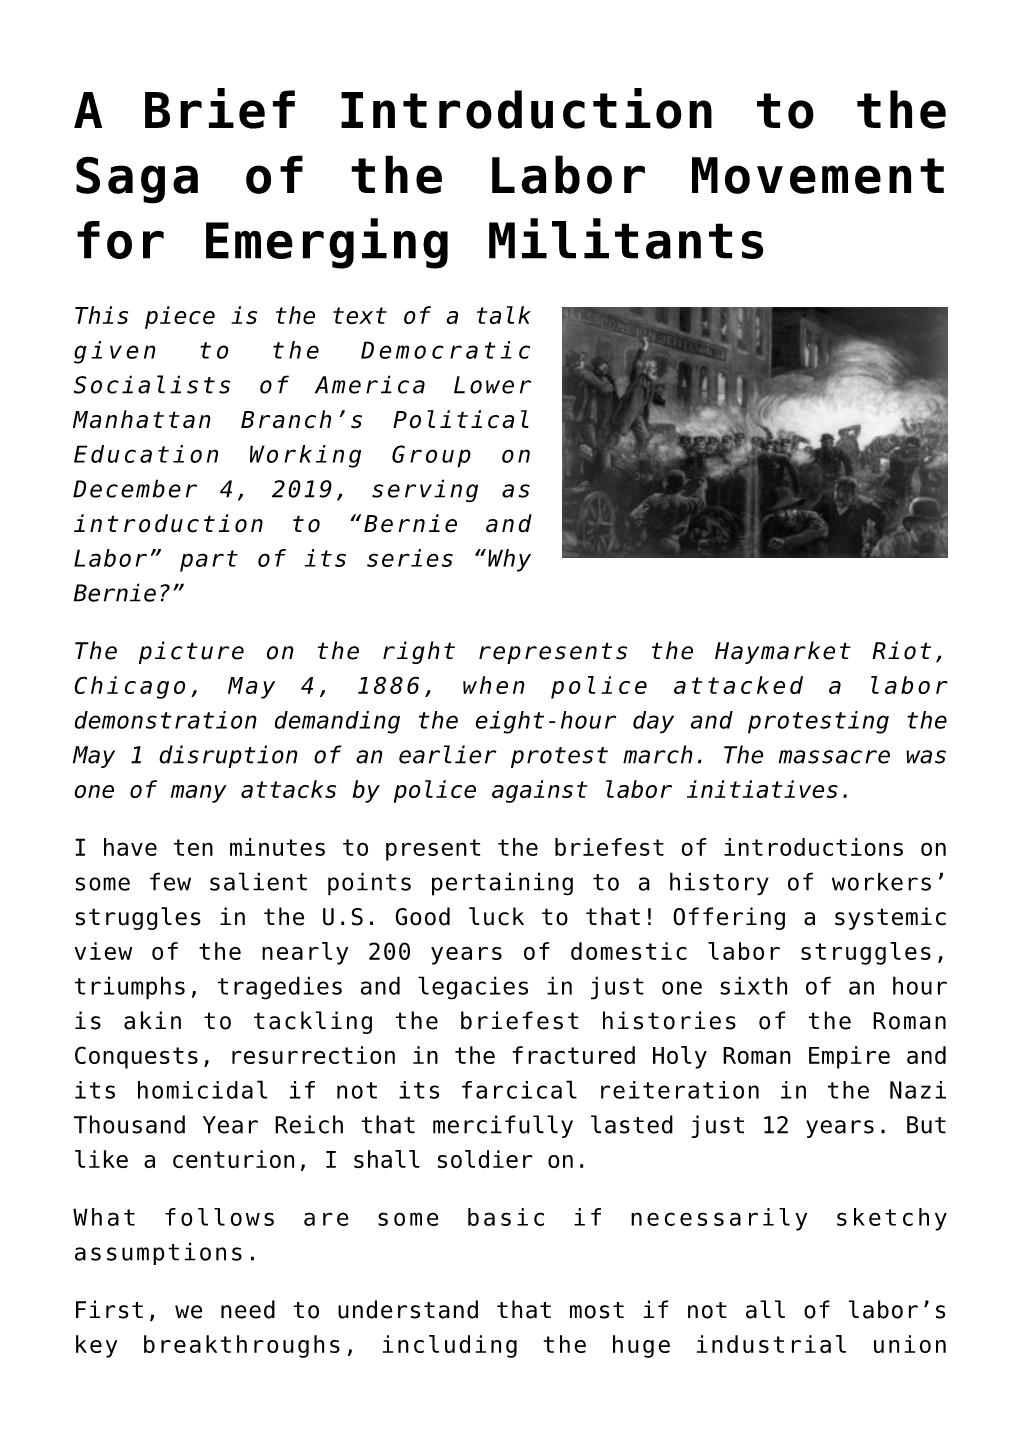 A Brief Introduction to the Saga of the Labor Movement for Emerging Militants